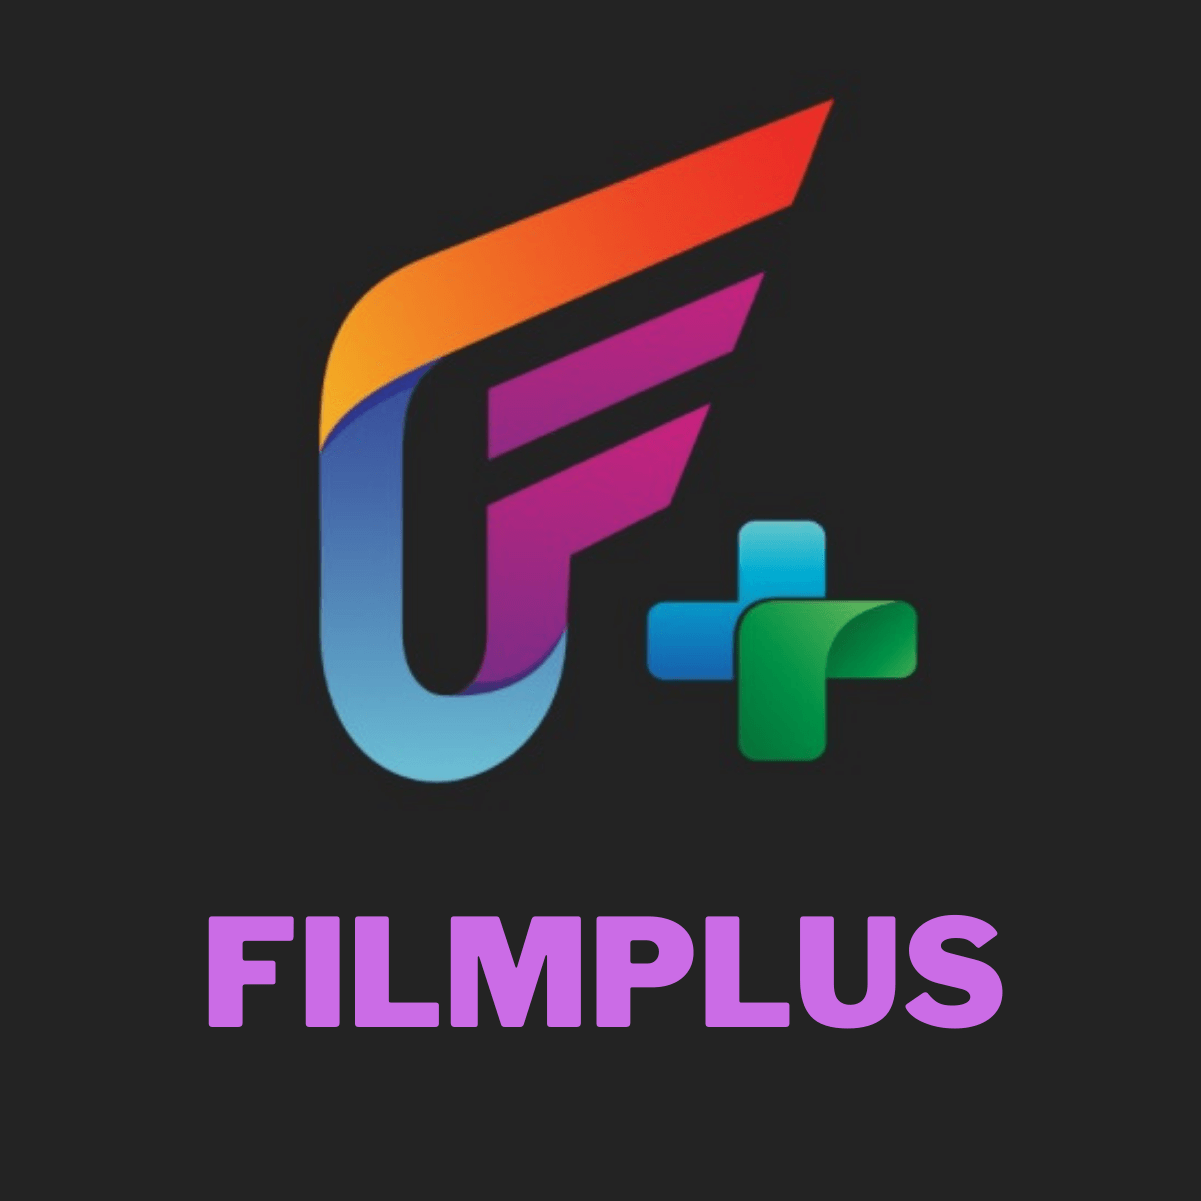 How To Download Filmplus On Firestick